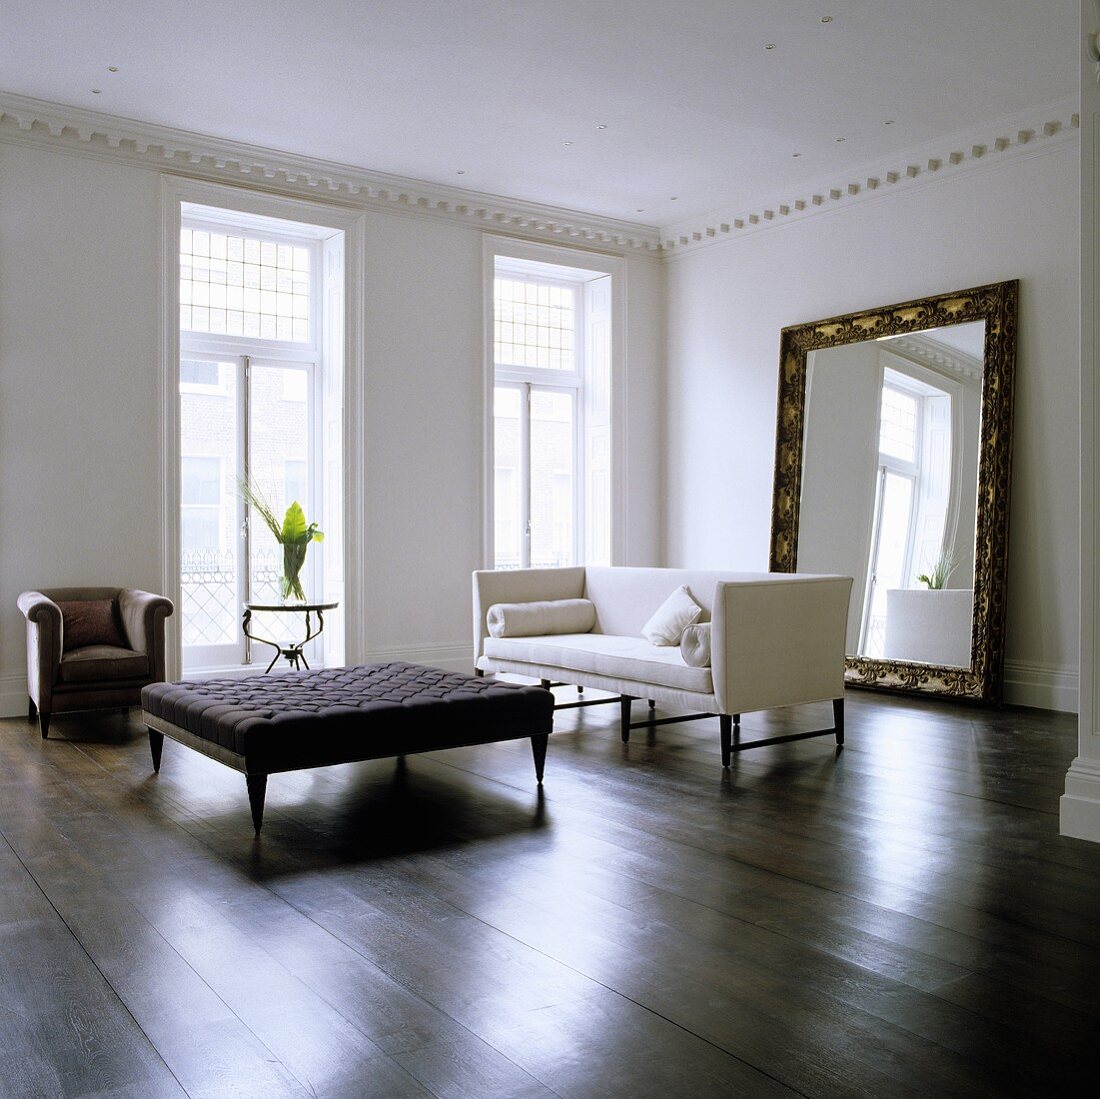 A minimalistic living room in a period building with a coffee table and a white sofa in front of a free-standing mirror